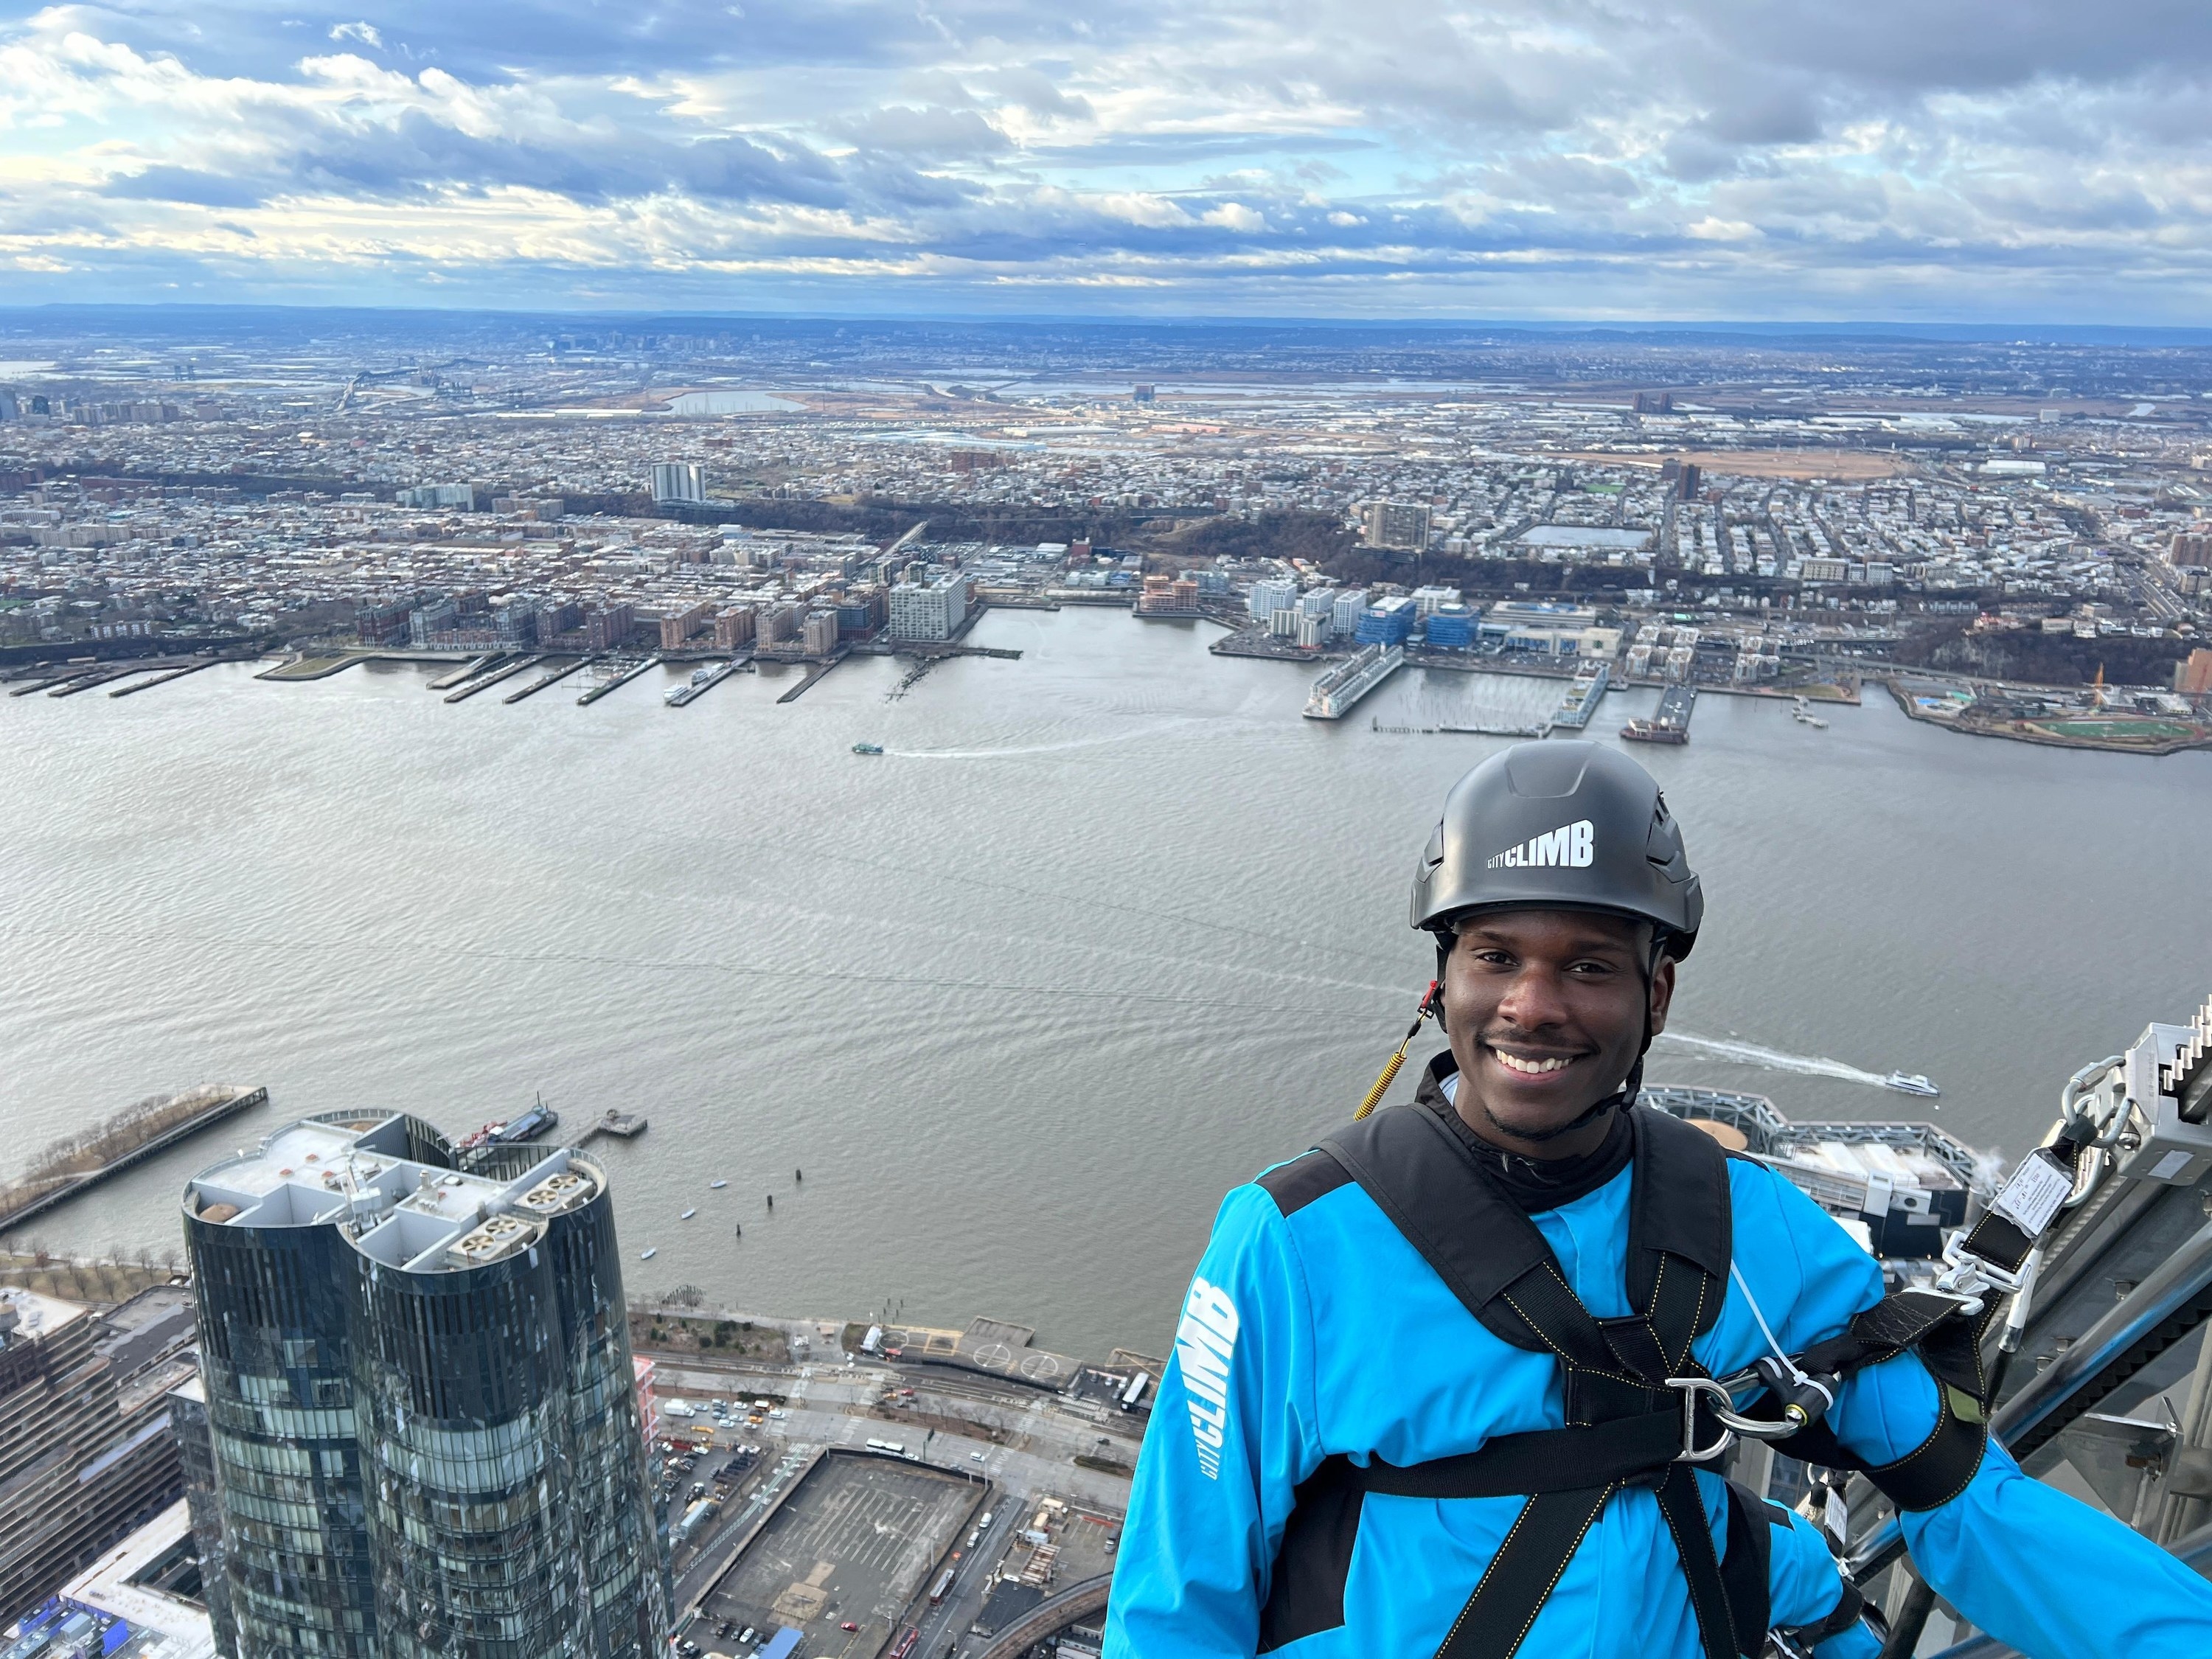 Terry smiling while on the skyscraper railing